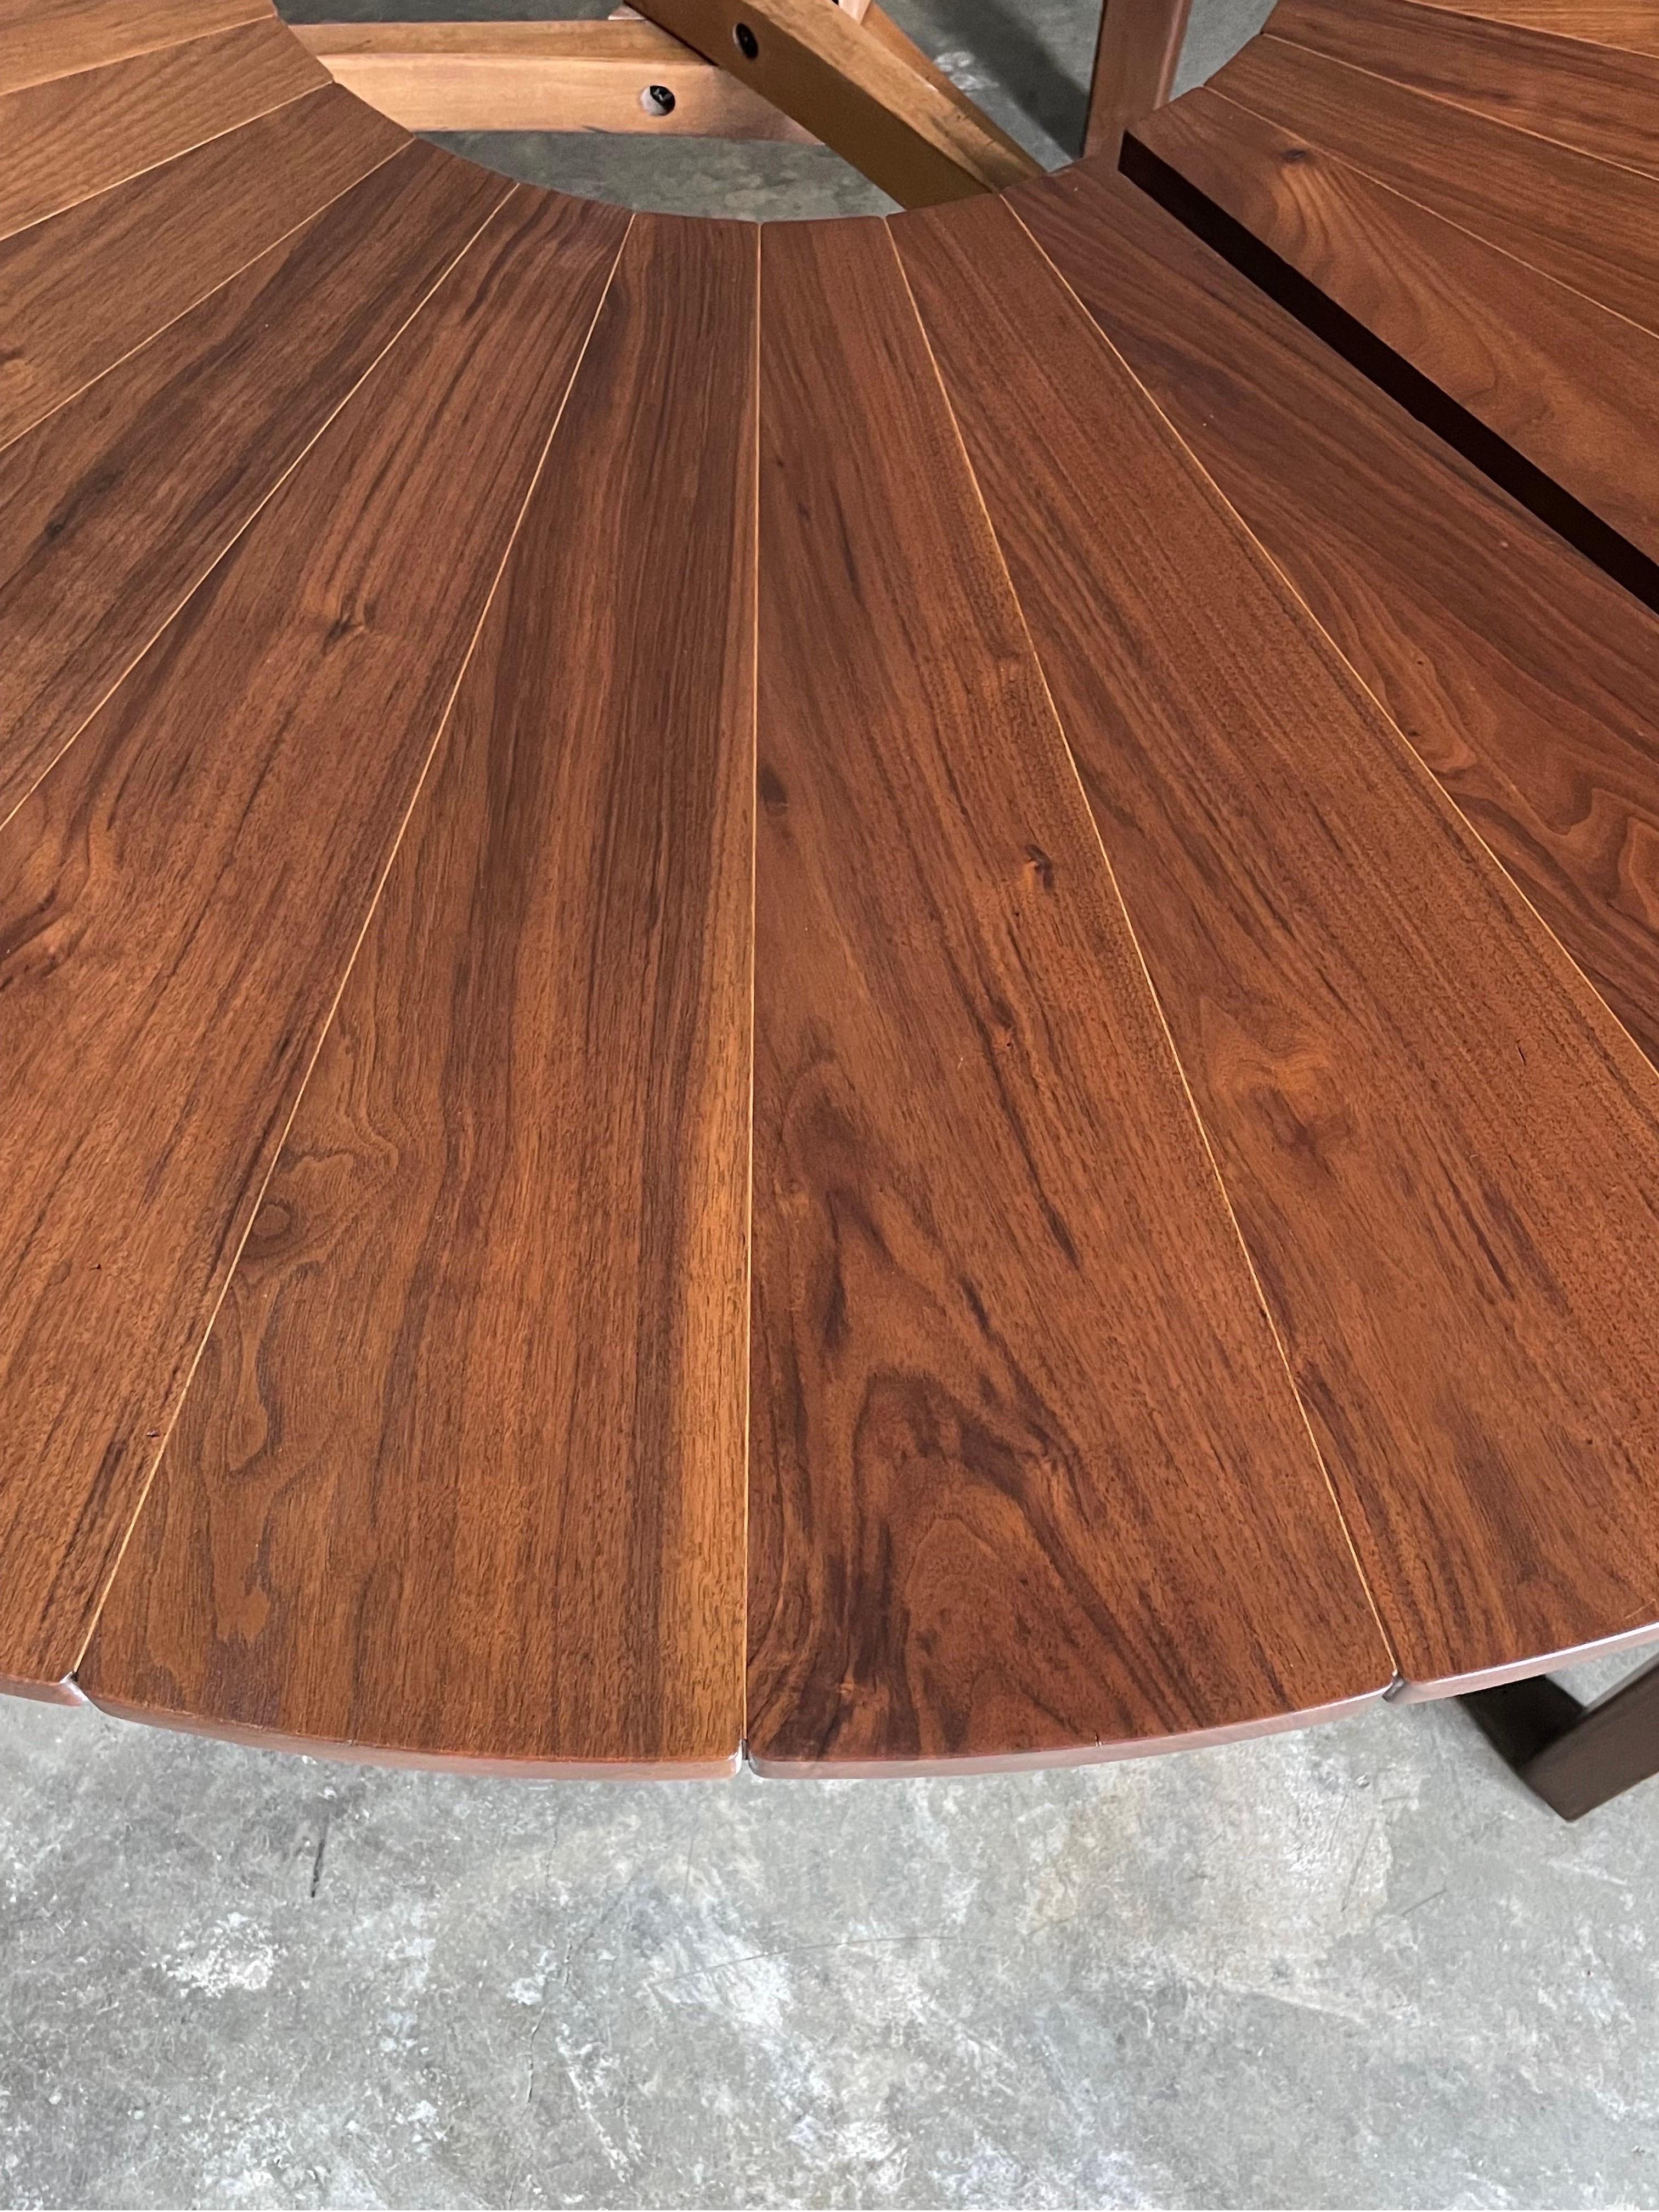 Studiocraft Round Petal Dining Table in Walnut and Maple, Charles Faucher 1975 3